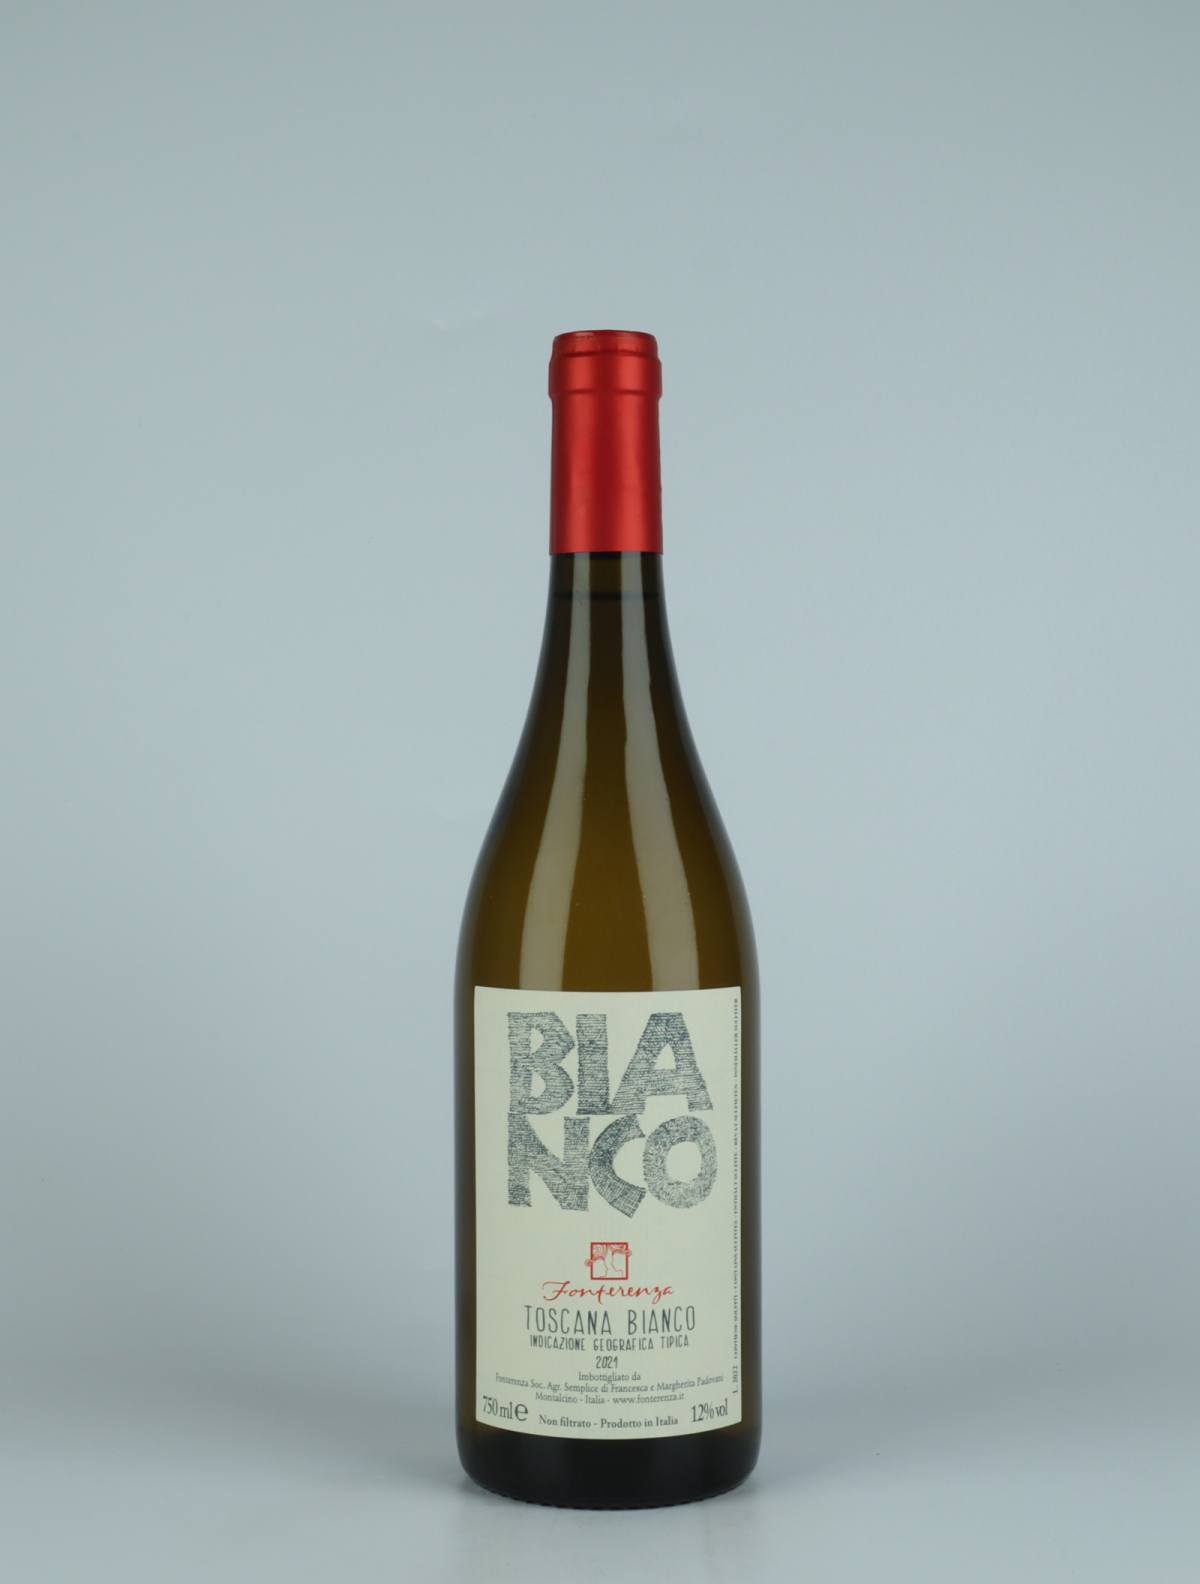 A bottle 2021 Bianco White wine from Fonterenza, Tuscany in Italy